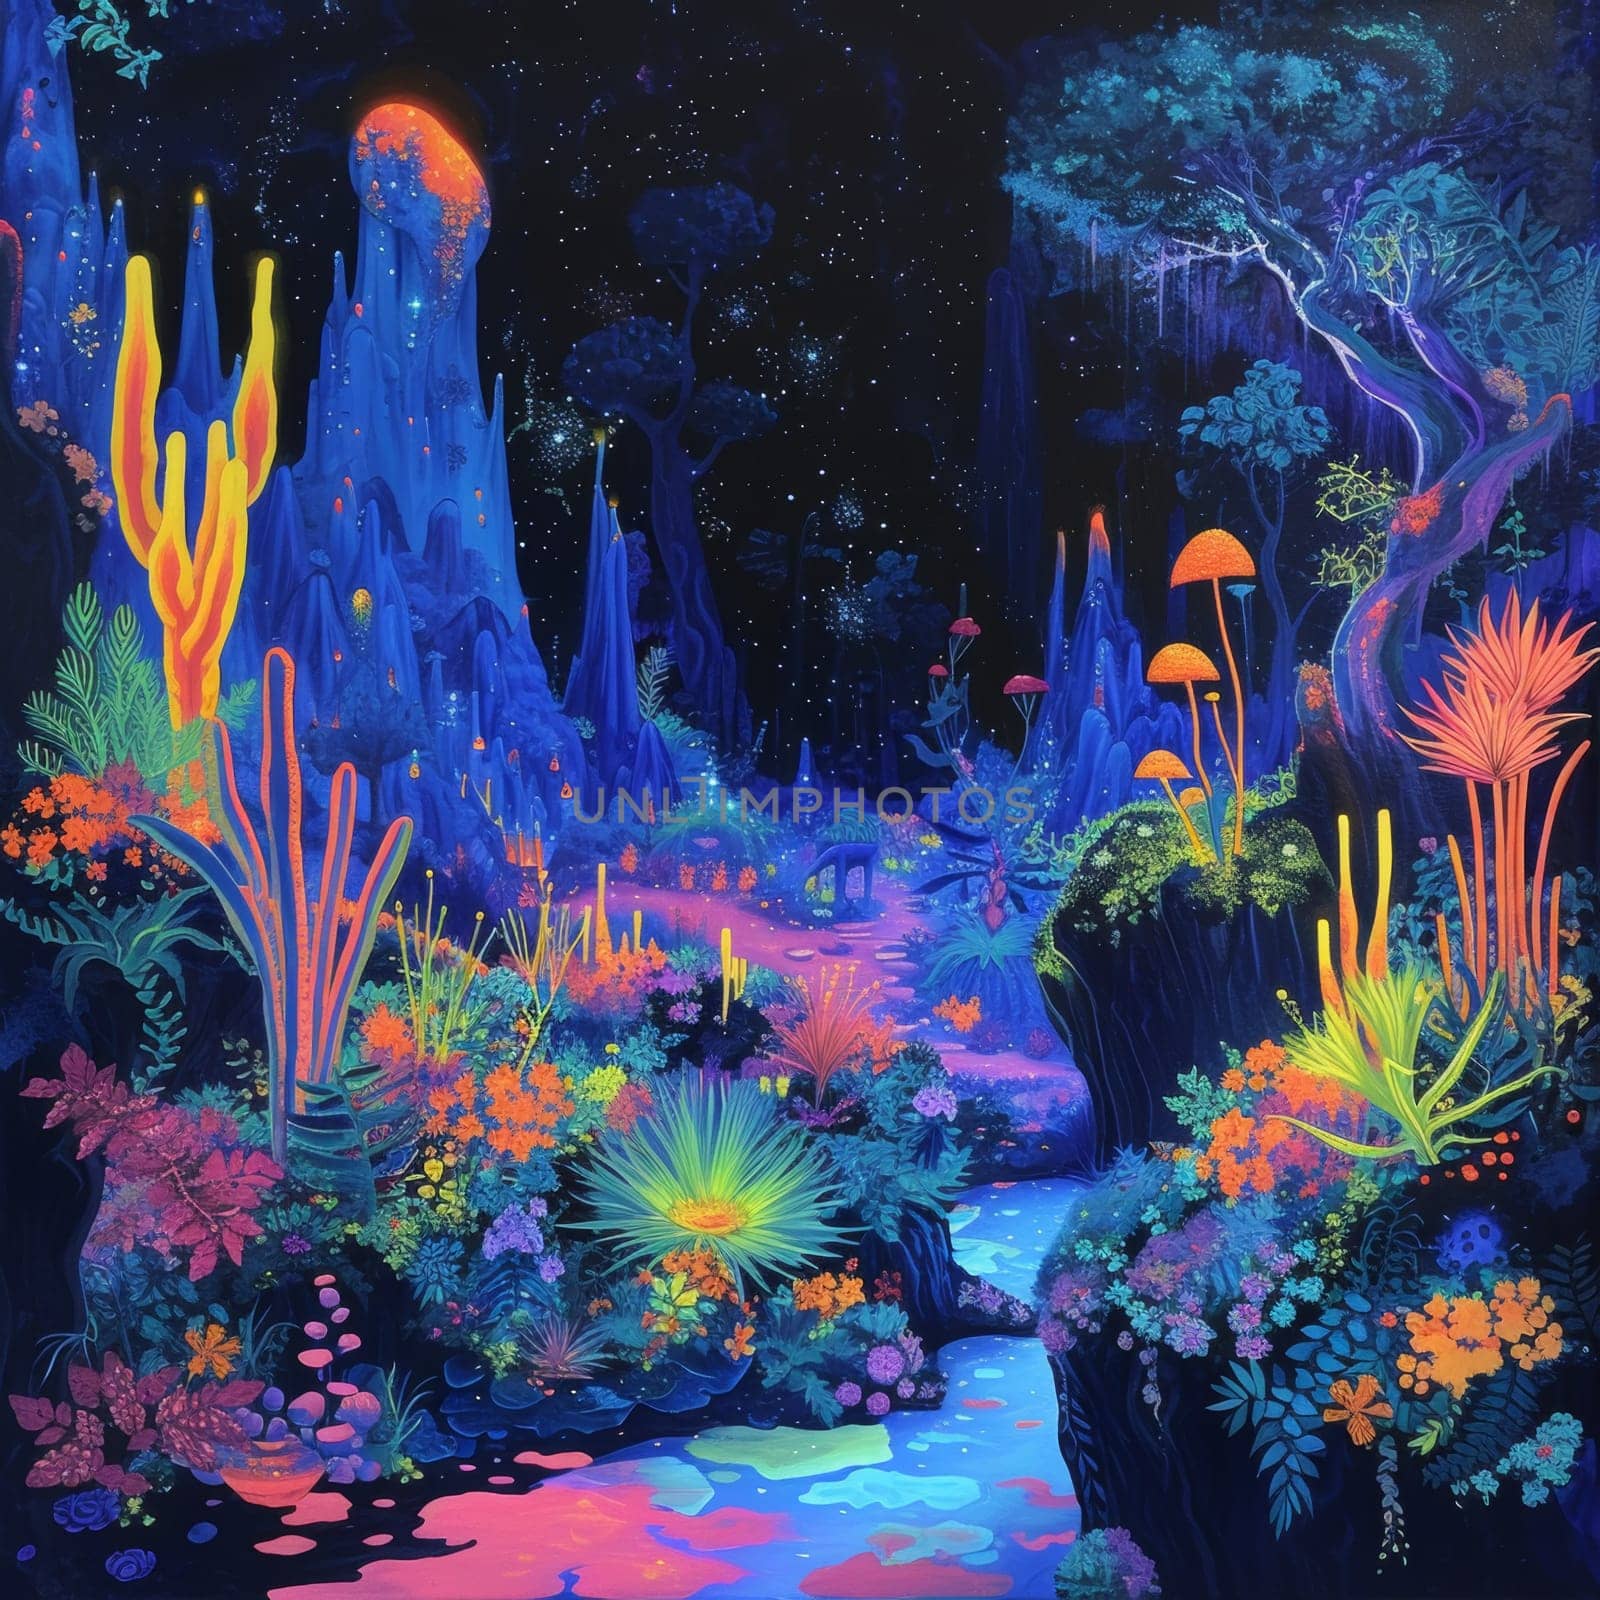 A painting of a colorful landscape with plants and trees